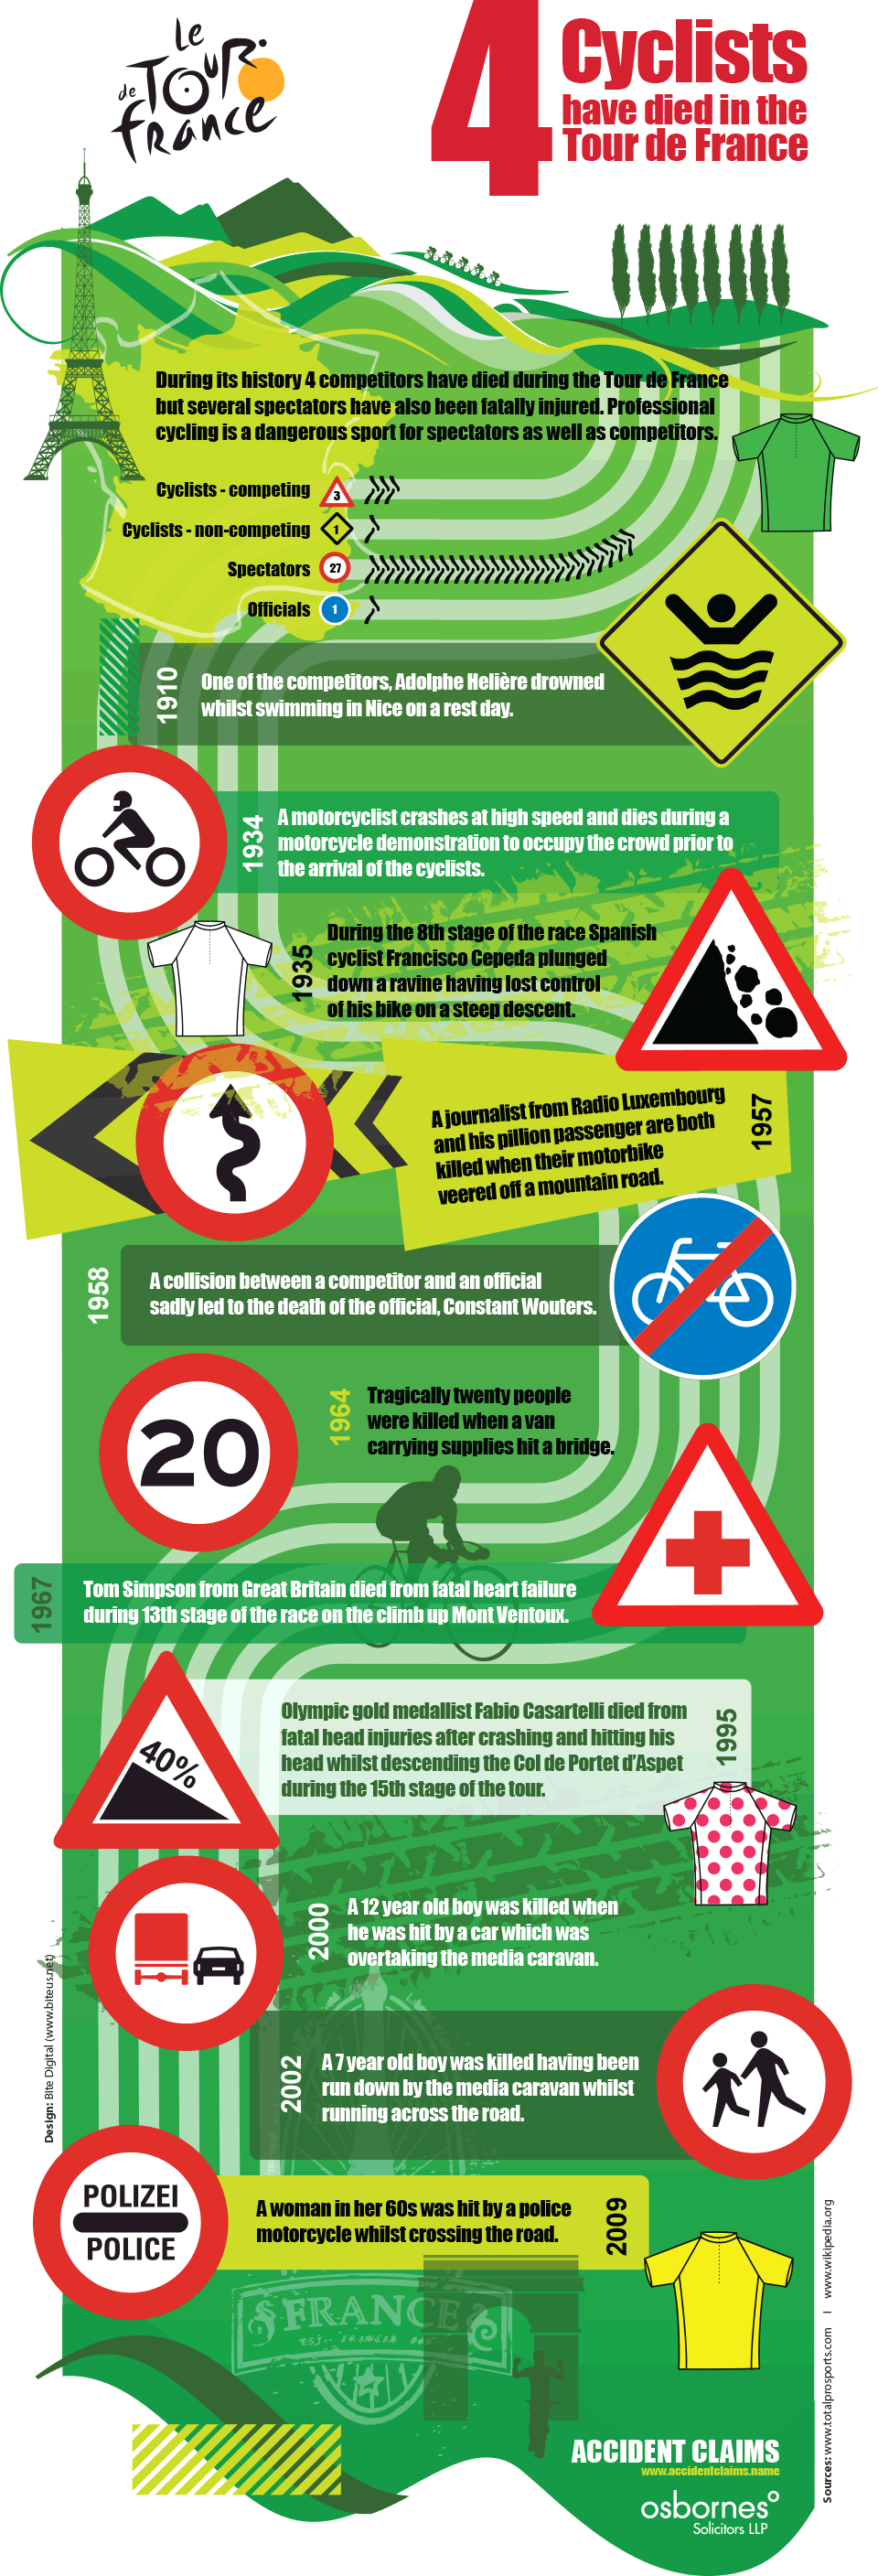 Accidents-In-Tour-De-France-infographic